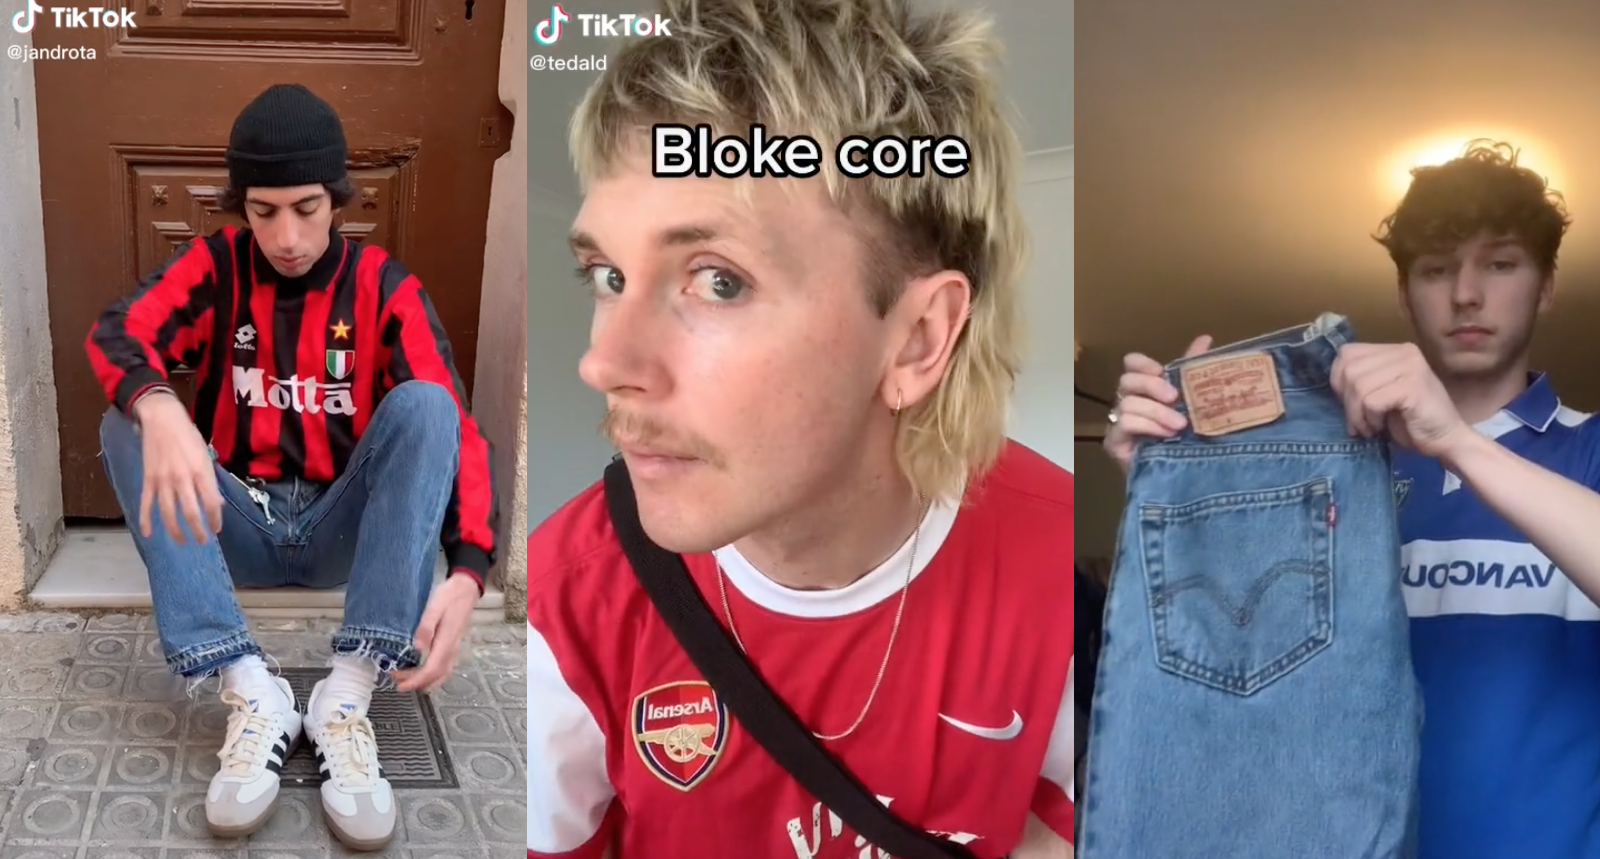 The Rise of 'Blokecore', the Football-Inspired Style Trend